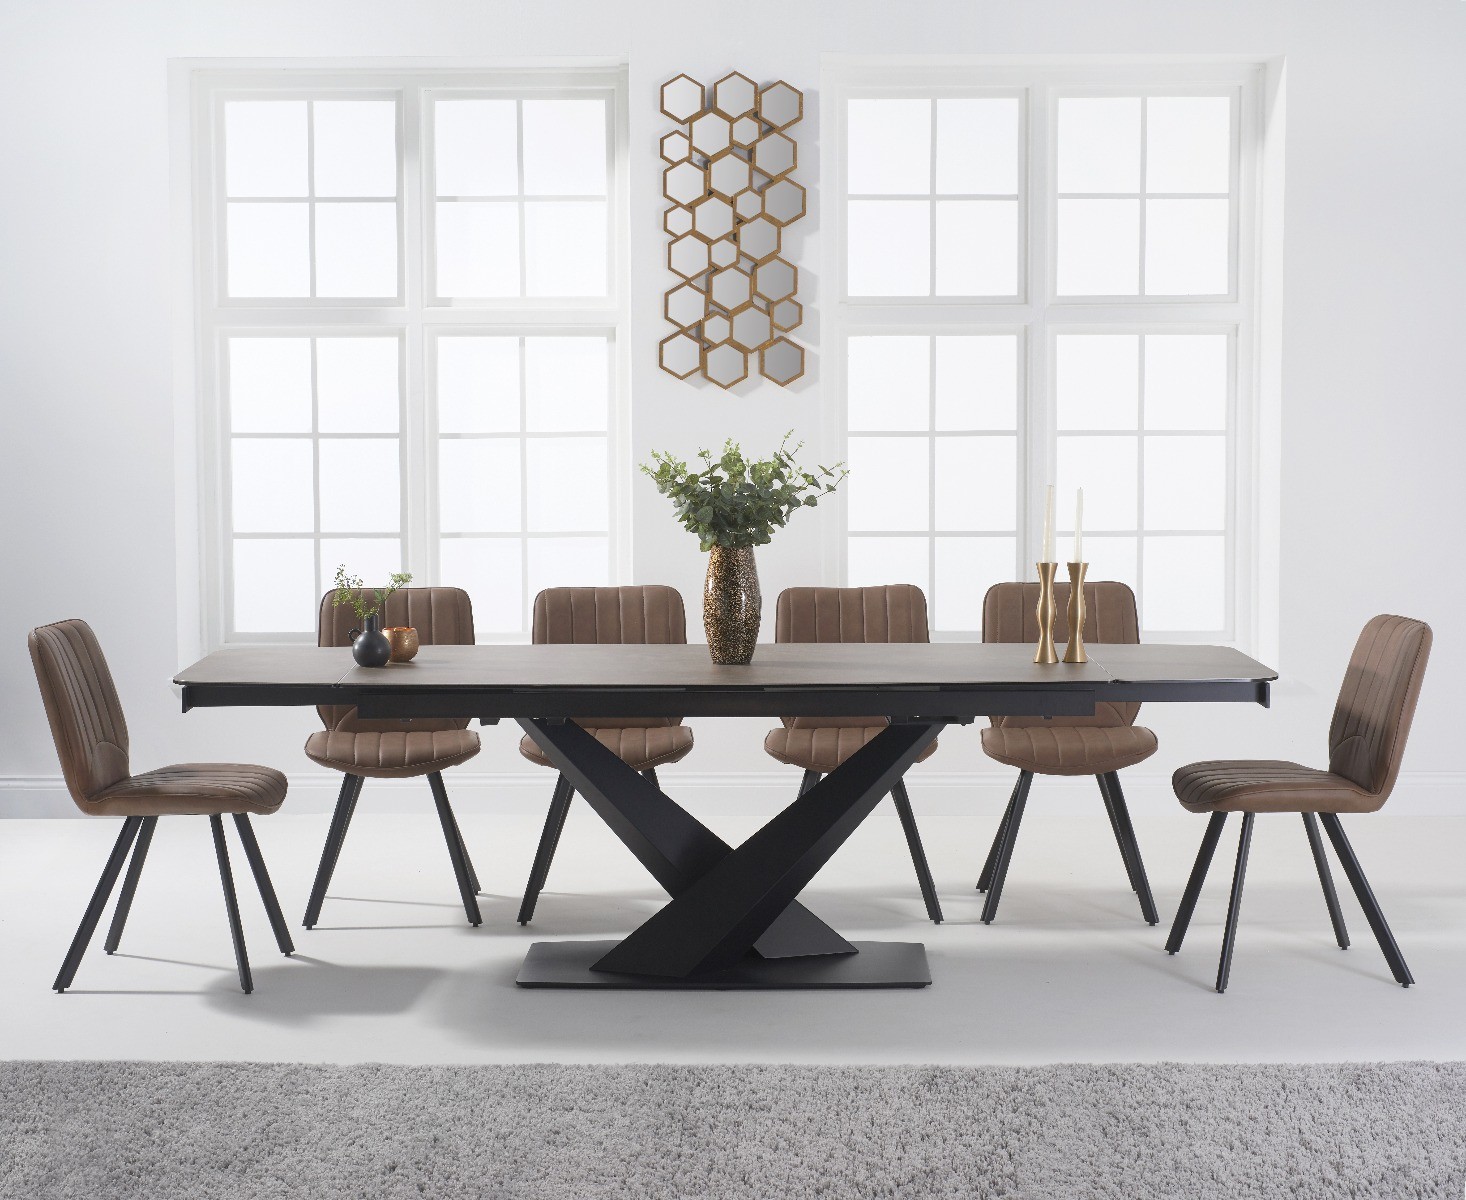 Extending Jacob 180cm Mink Ceramic Dining Table With 10 Grey Hendrick Chairs